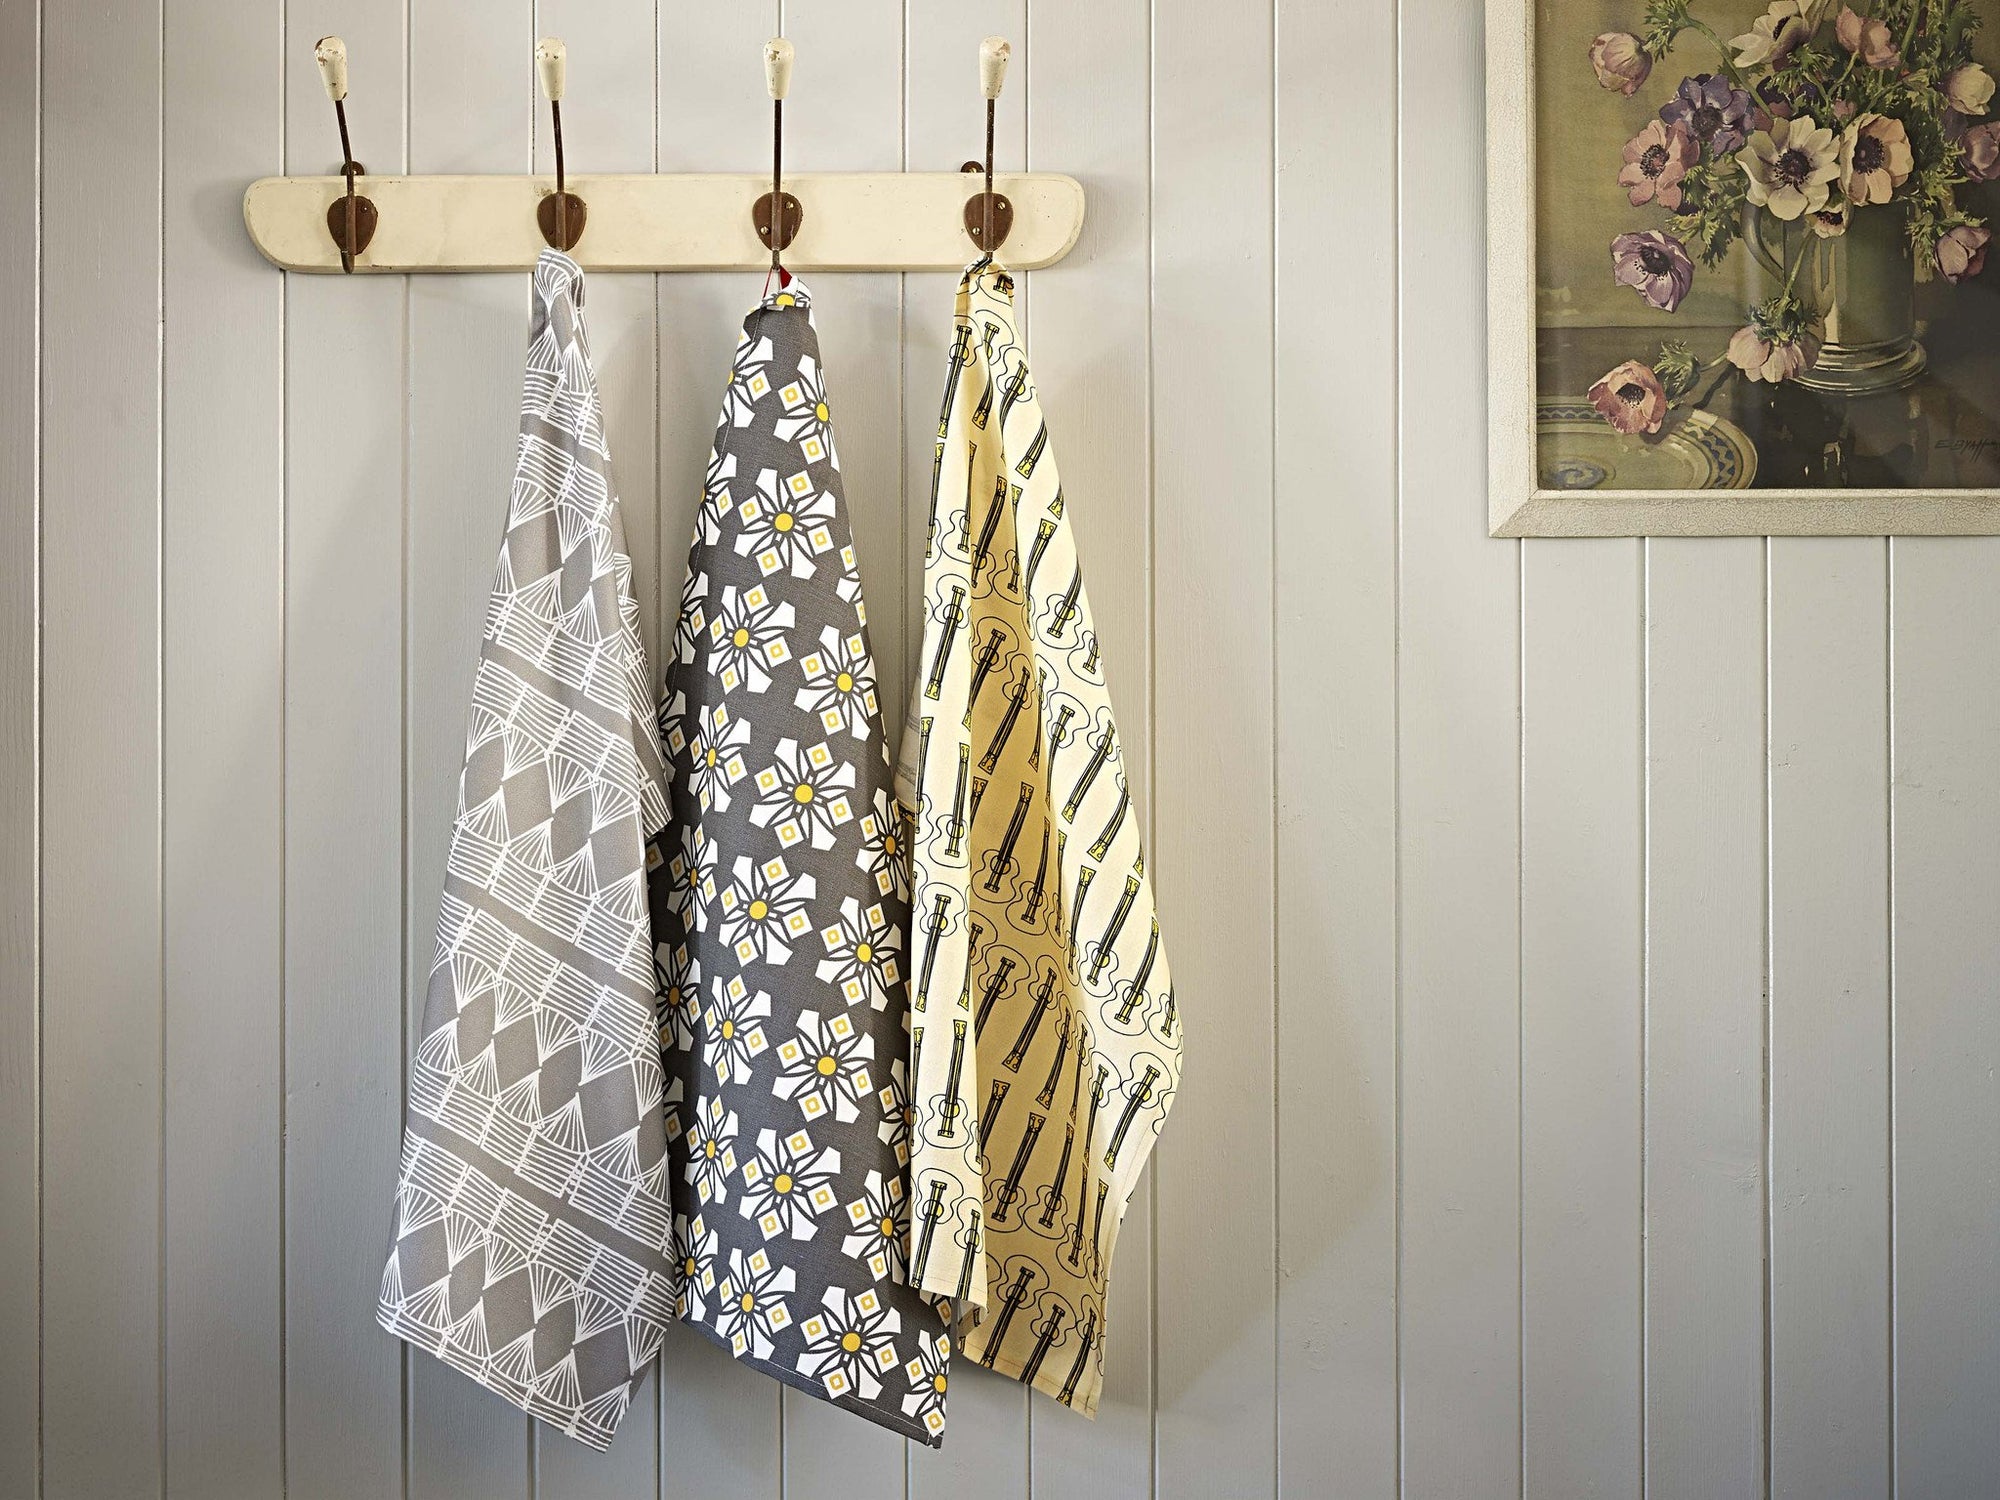 Kitchen tea towels in bright modern prints and stripes in shades of yellow from gold to straw in absorbent cotton linen ships from Canada worldwide including the USA